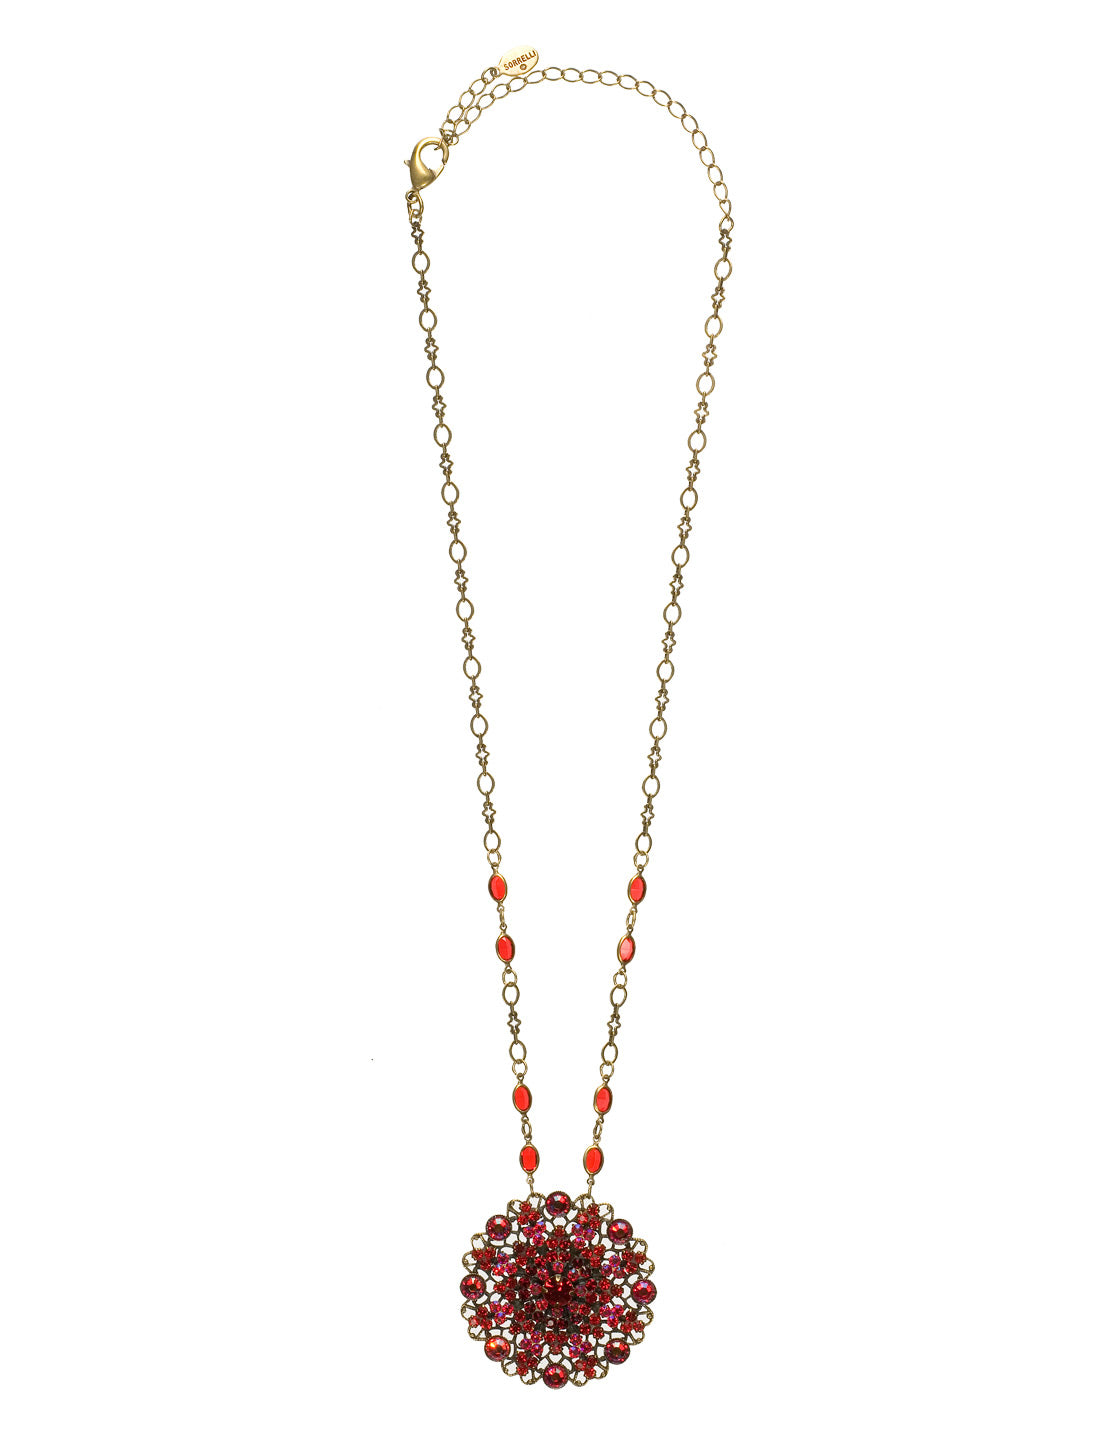 Mystical Filigree Pendant Necklace - NBP35AGCB - The Mystical Filigree Pendant necklace is a beautiful statement piece; intricate metalwork and sparkling crystals create a timeless piece that can be worn for decades. From Sorrelli's Cranberry collection in our Antique Gold-tone finish.